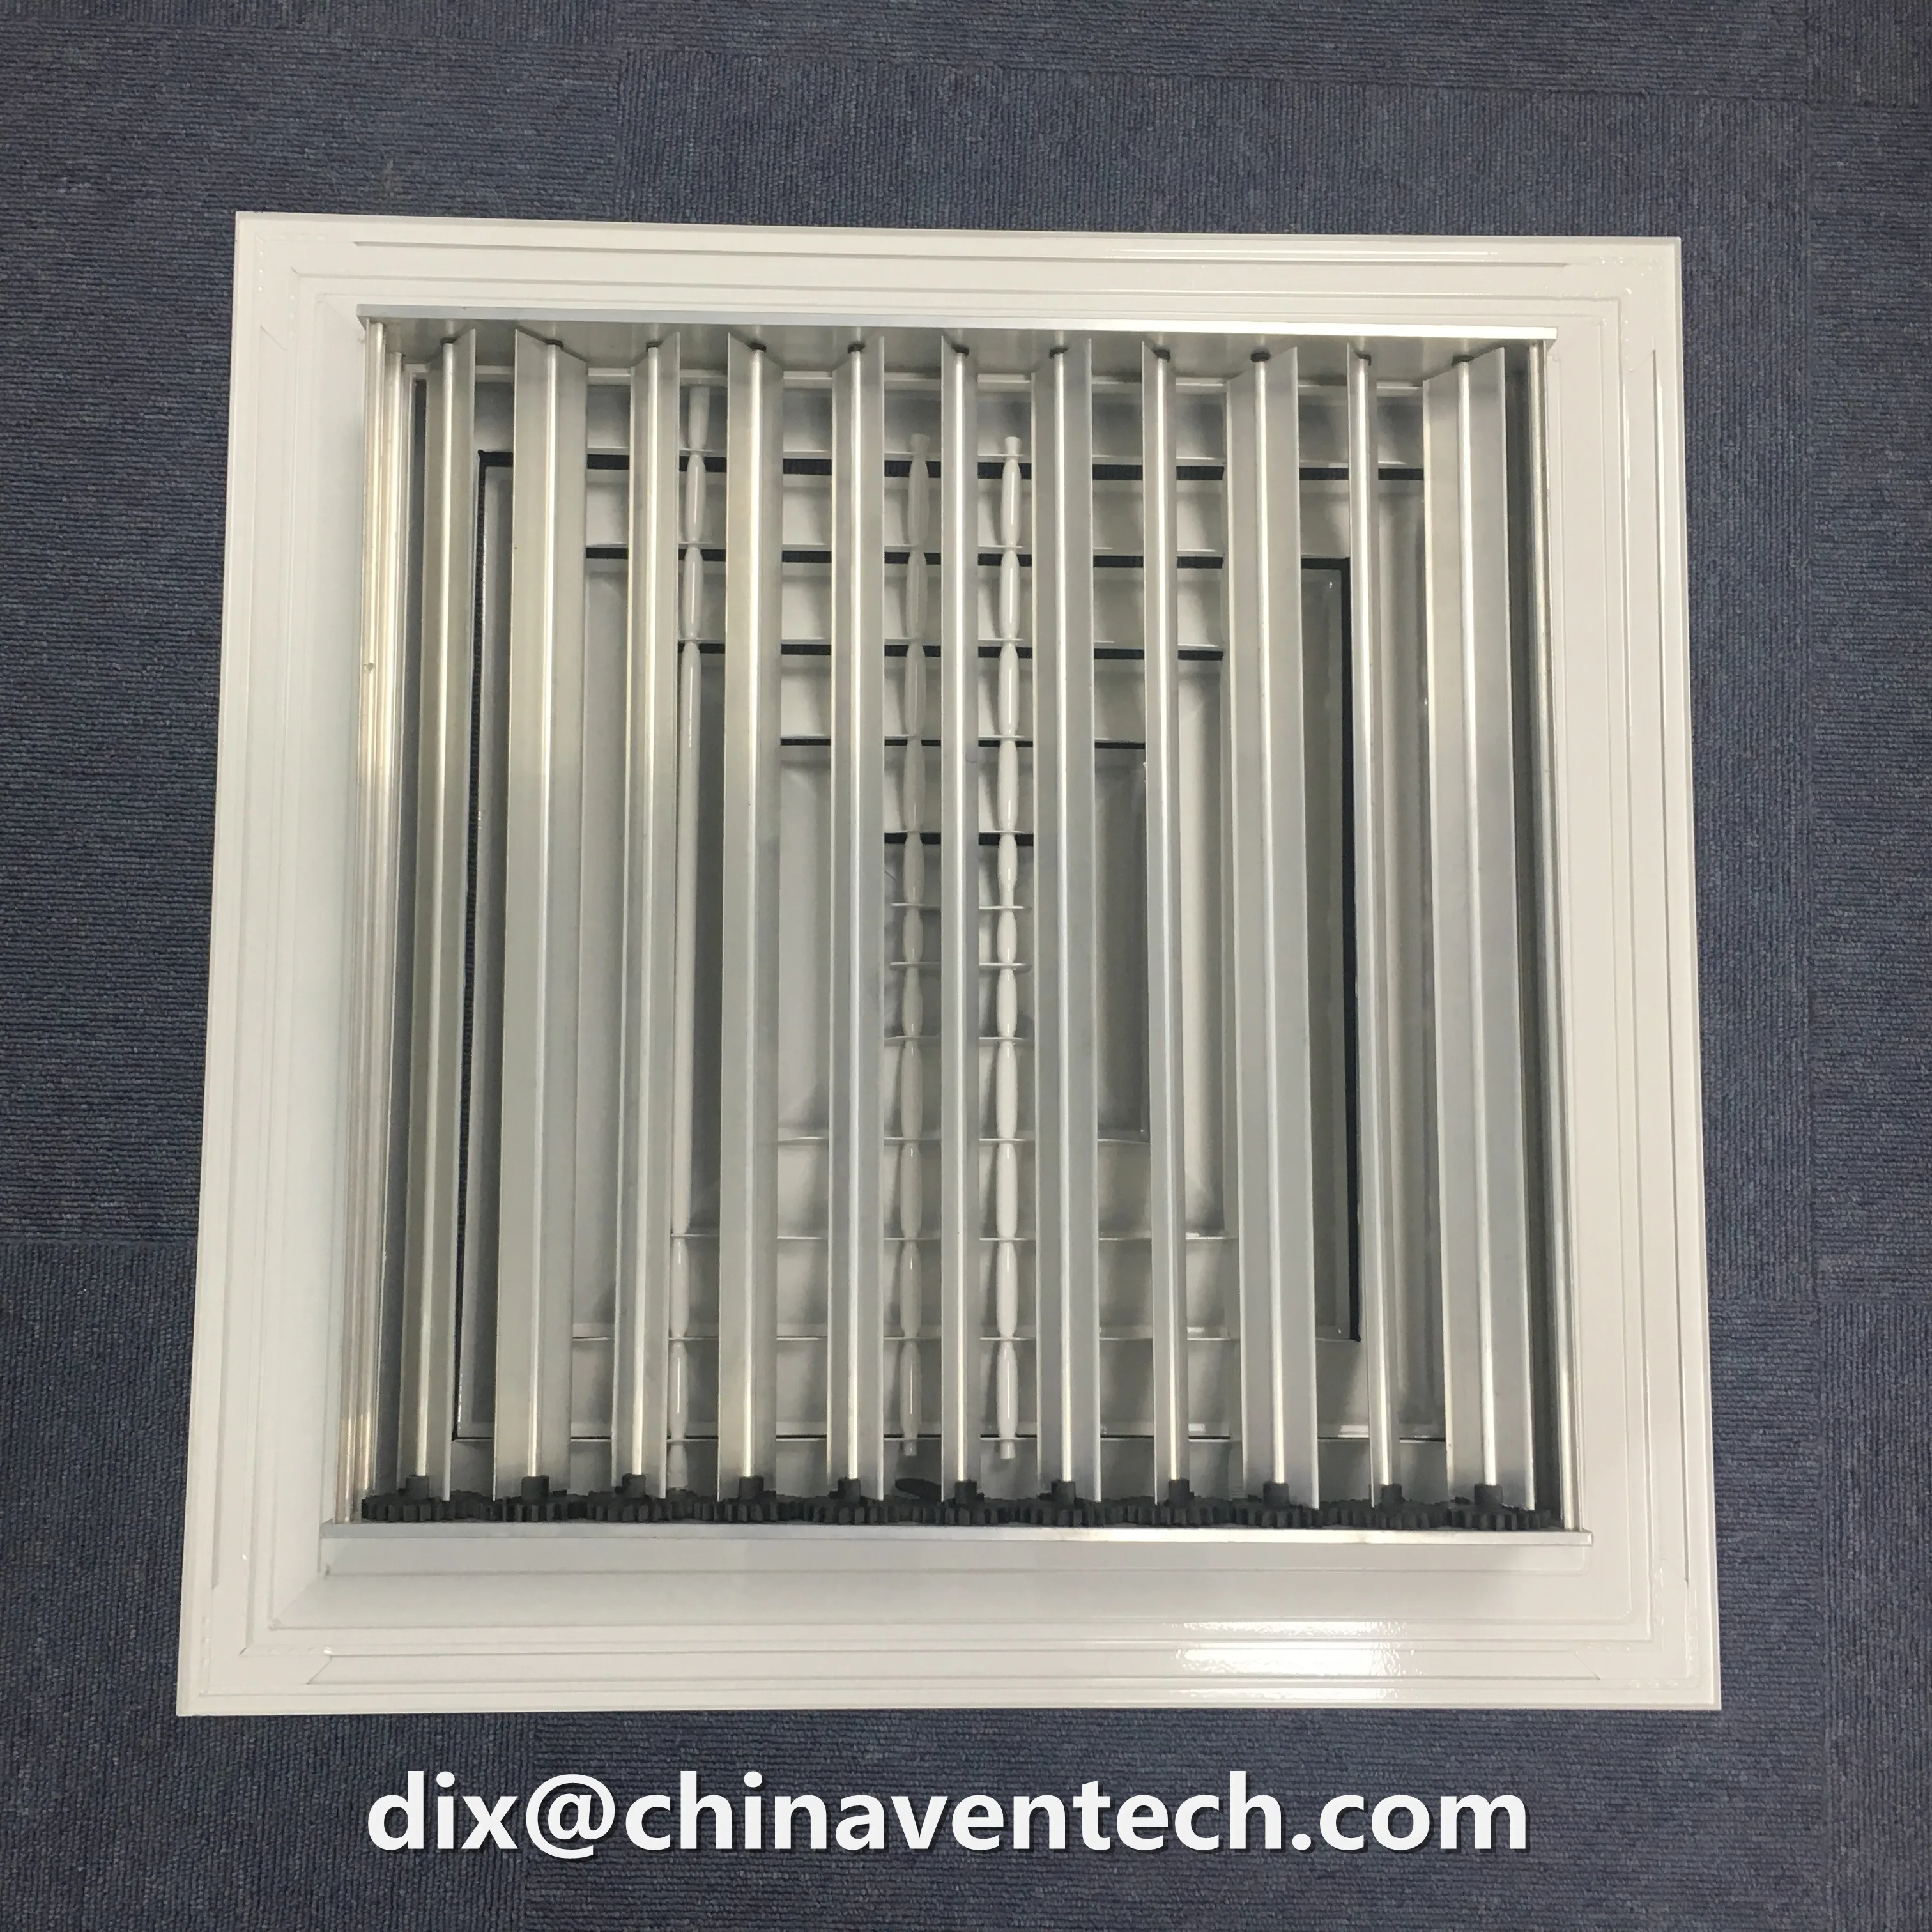 China Factory Ventech Free Sample Four Ways Flow Pattern Square Ceiling Diffuser